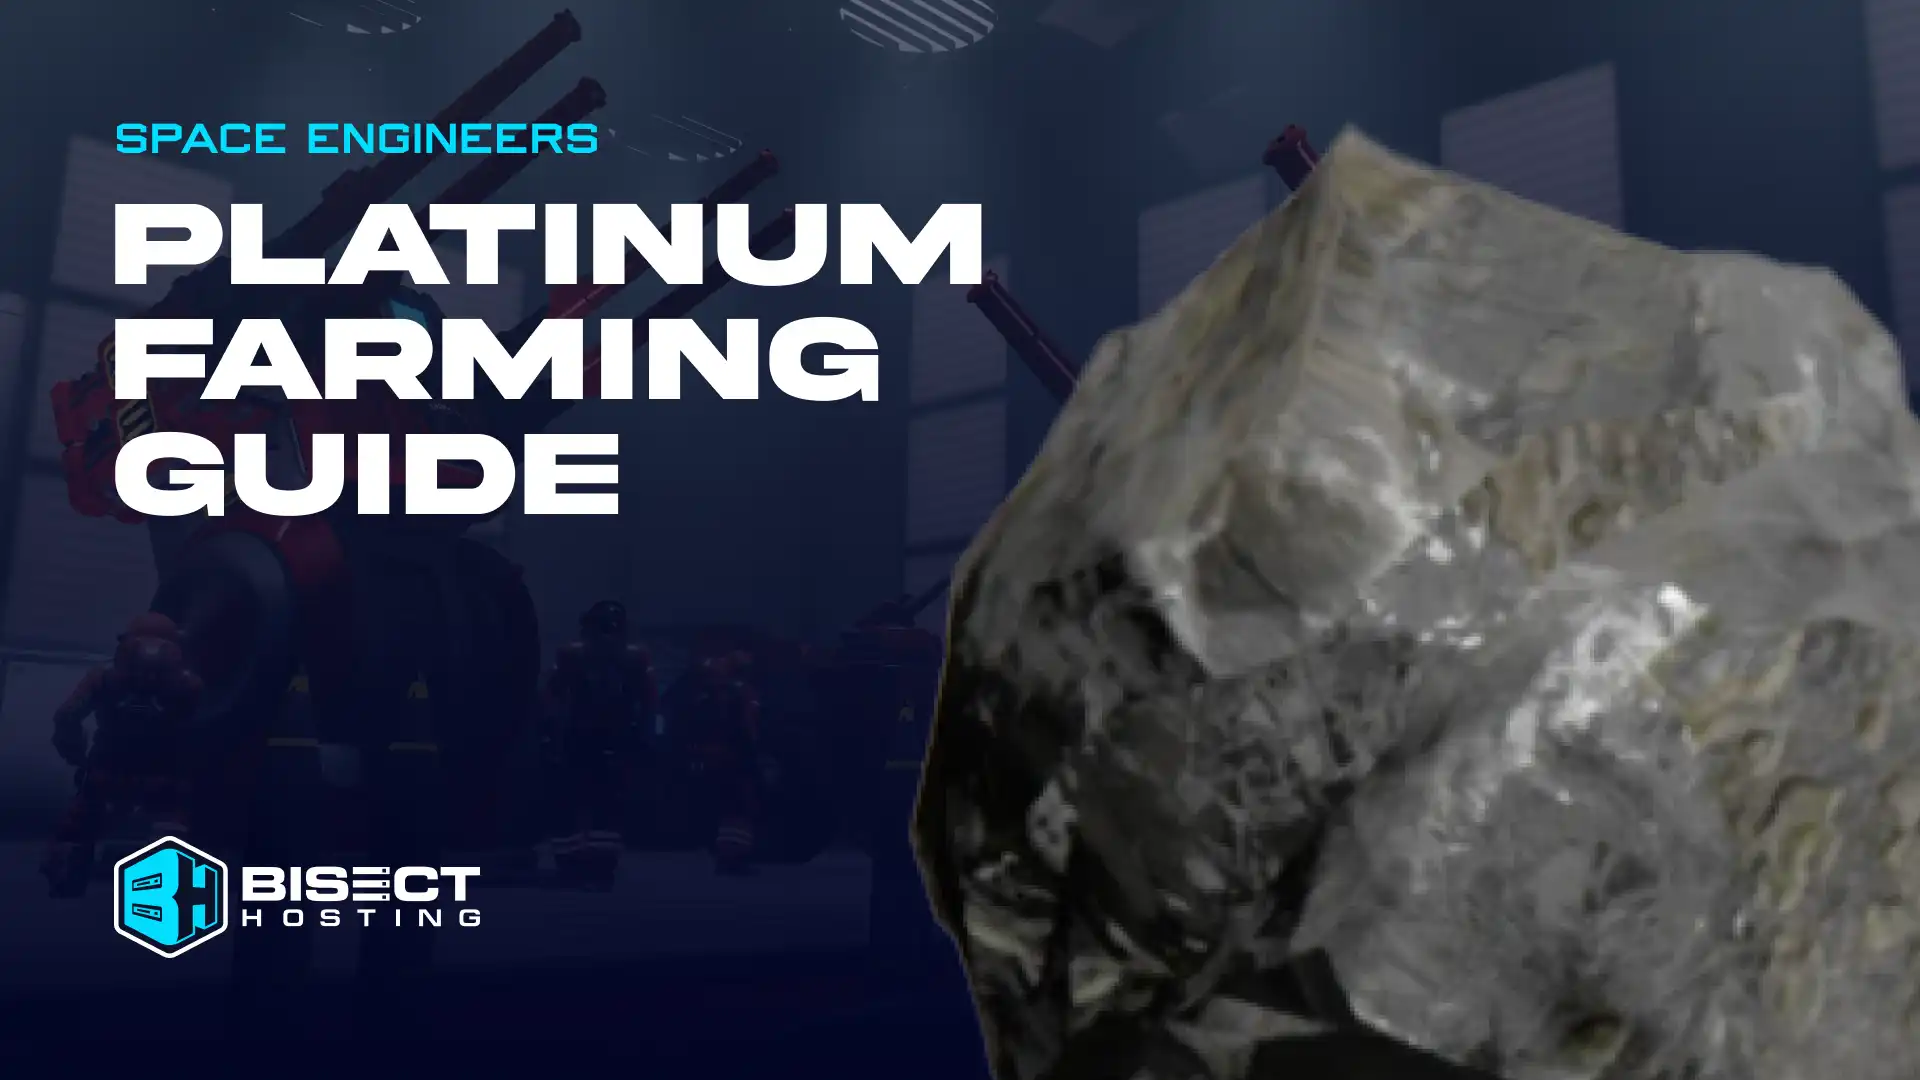 Space Engineers Platinum Farming Guide: Locations, Appearance, & Crafting Recipes